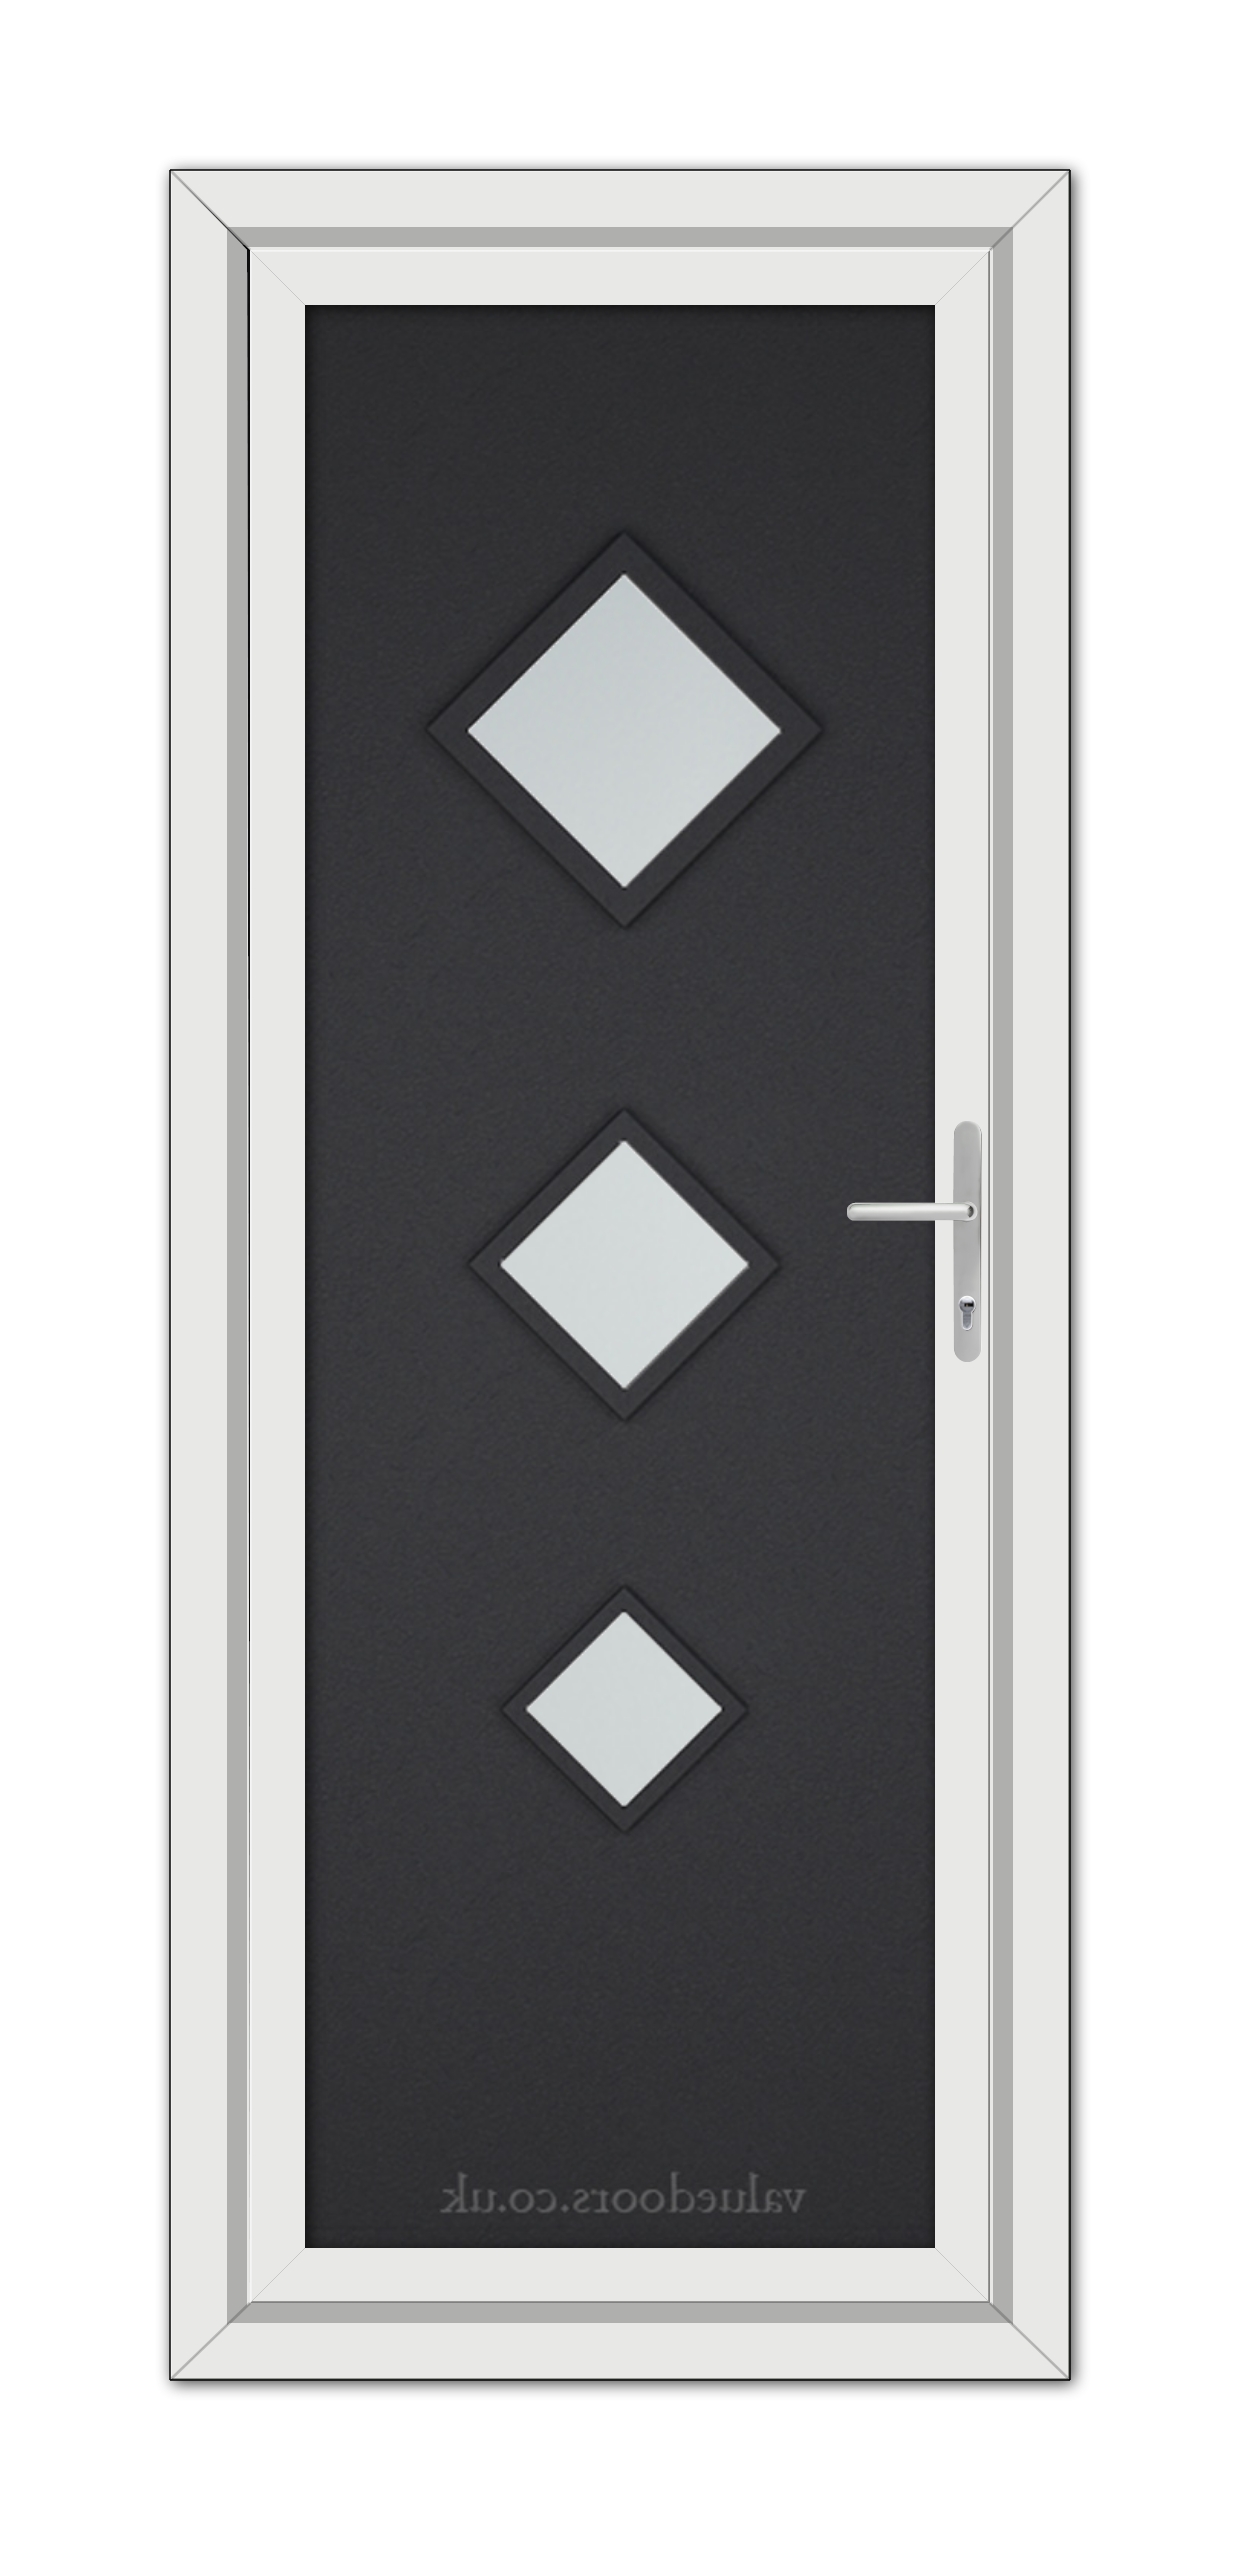 A Black Brown Modern 5123 uPVC door featuring three diamond-shaped windows and a silver handle, set within a white frame.